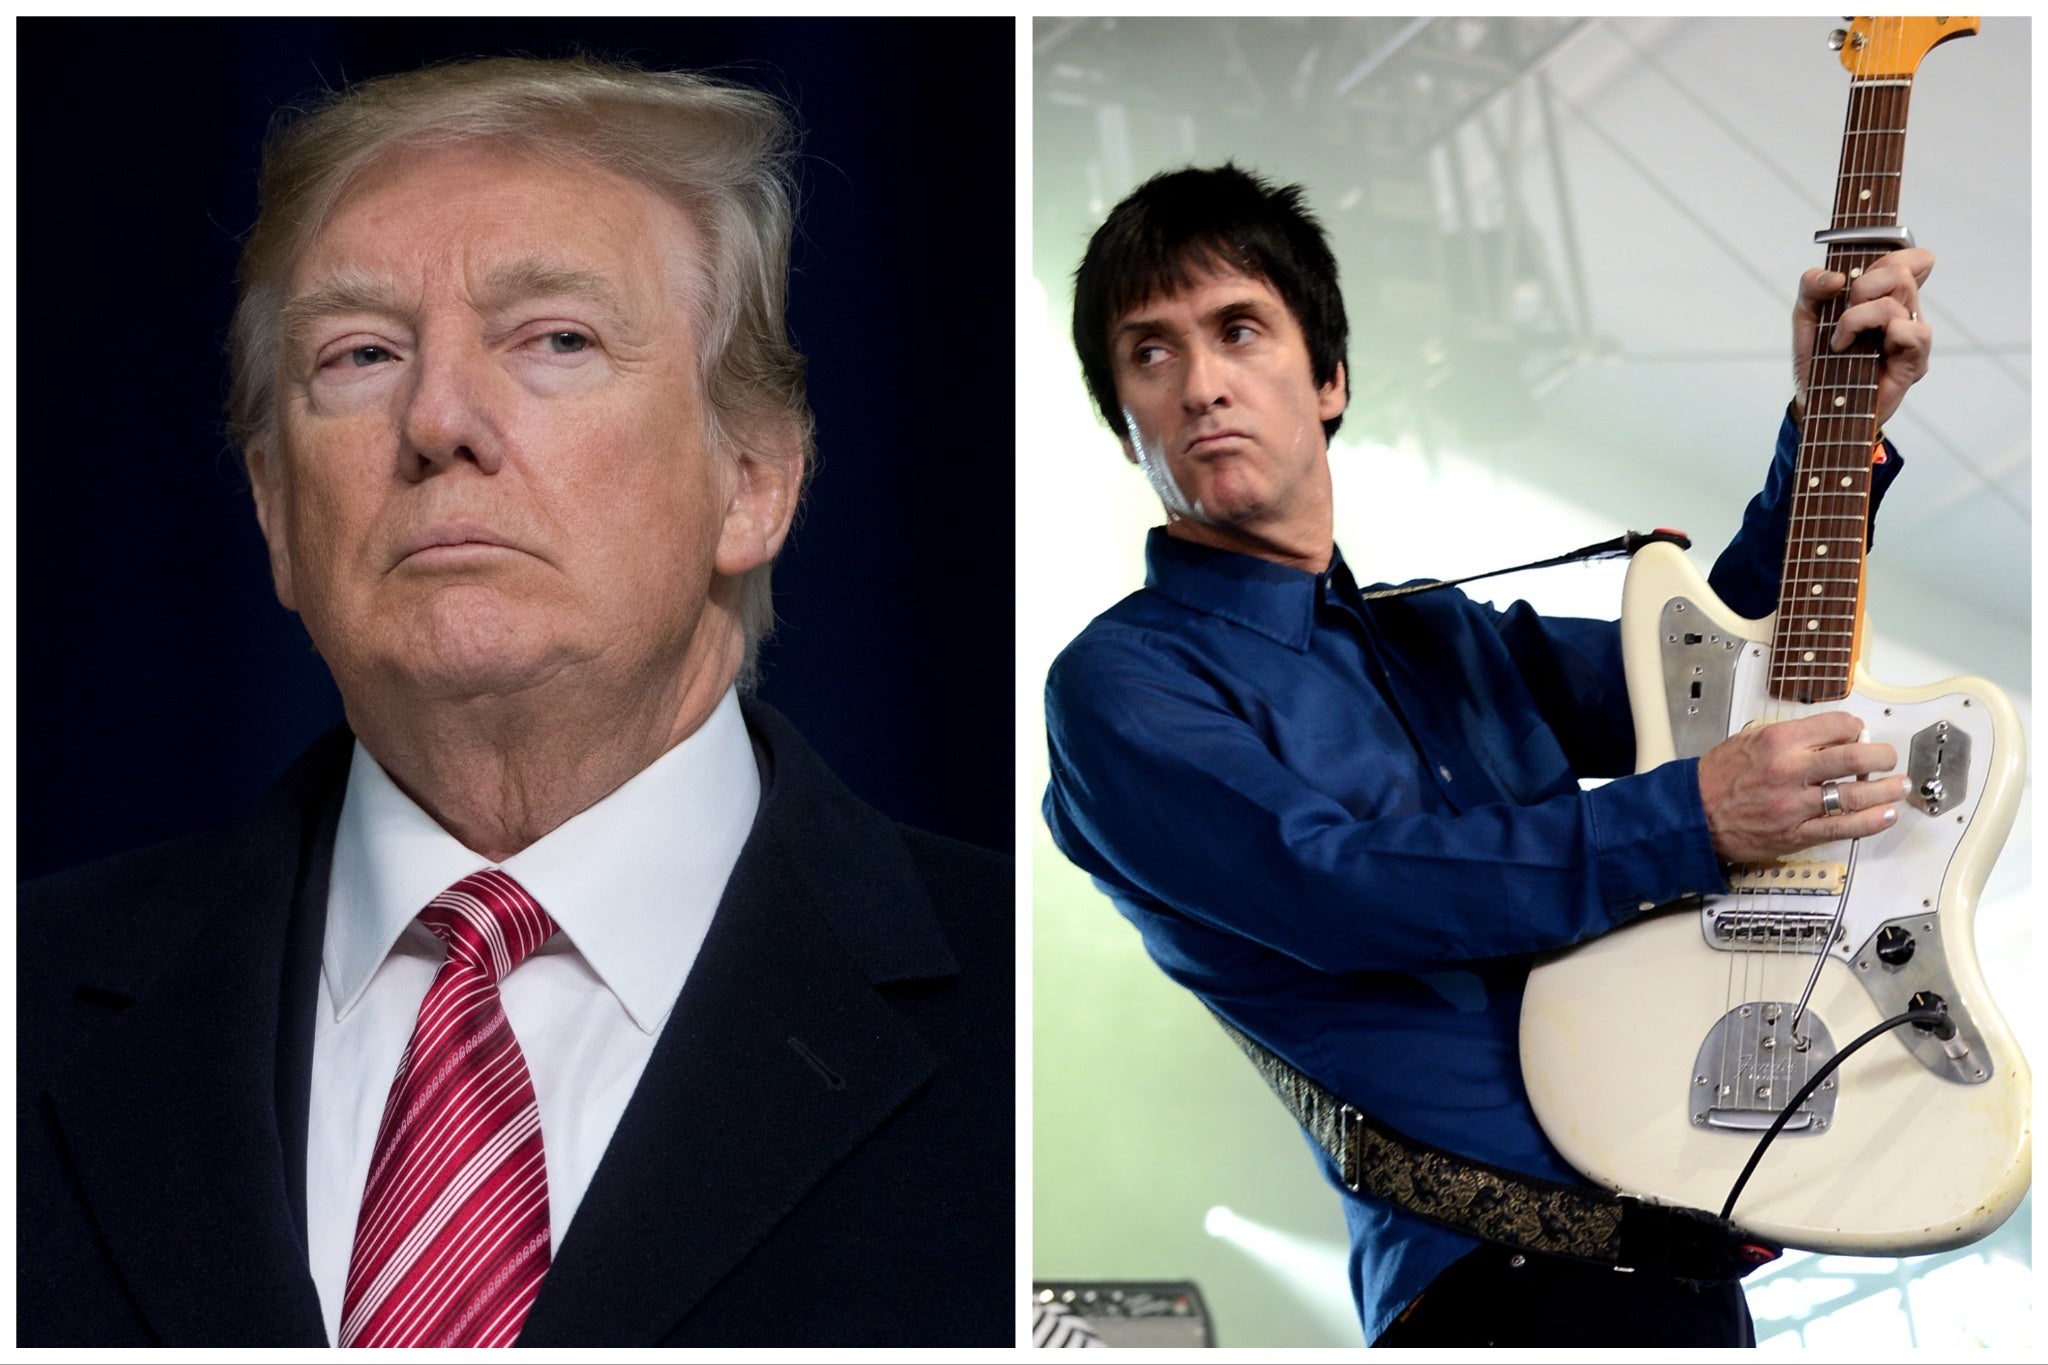 Johnny Marr is not the first recording artist to object to their music being used by Trump